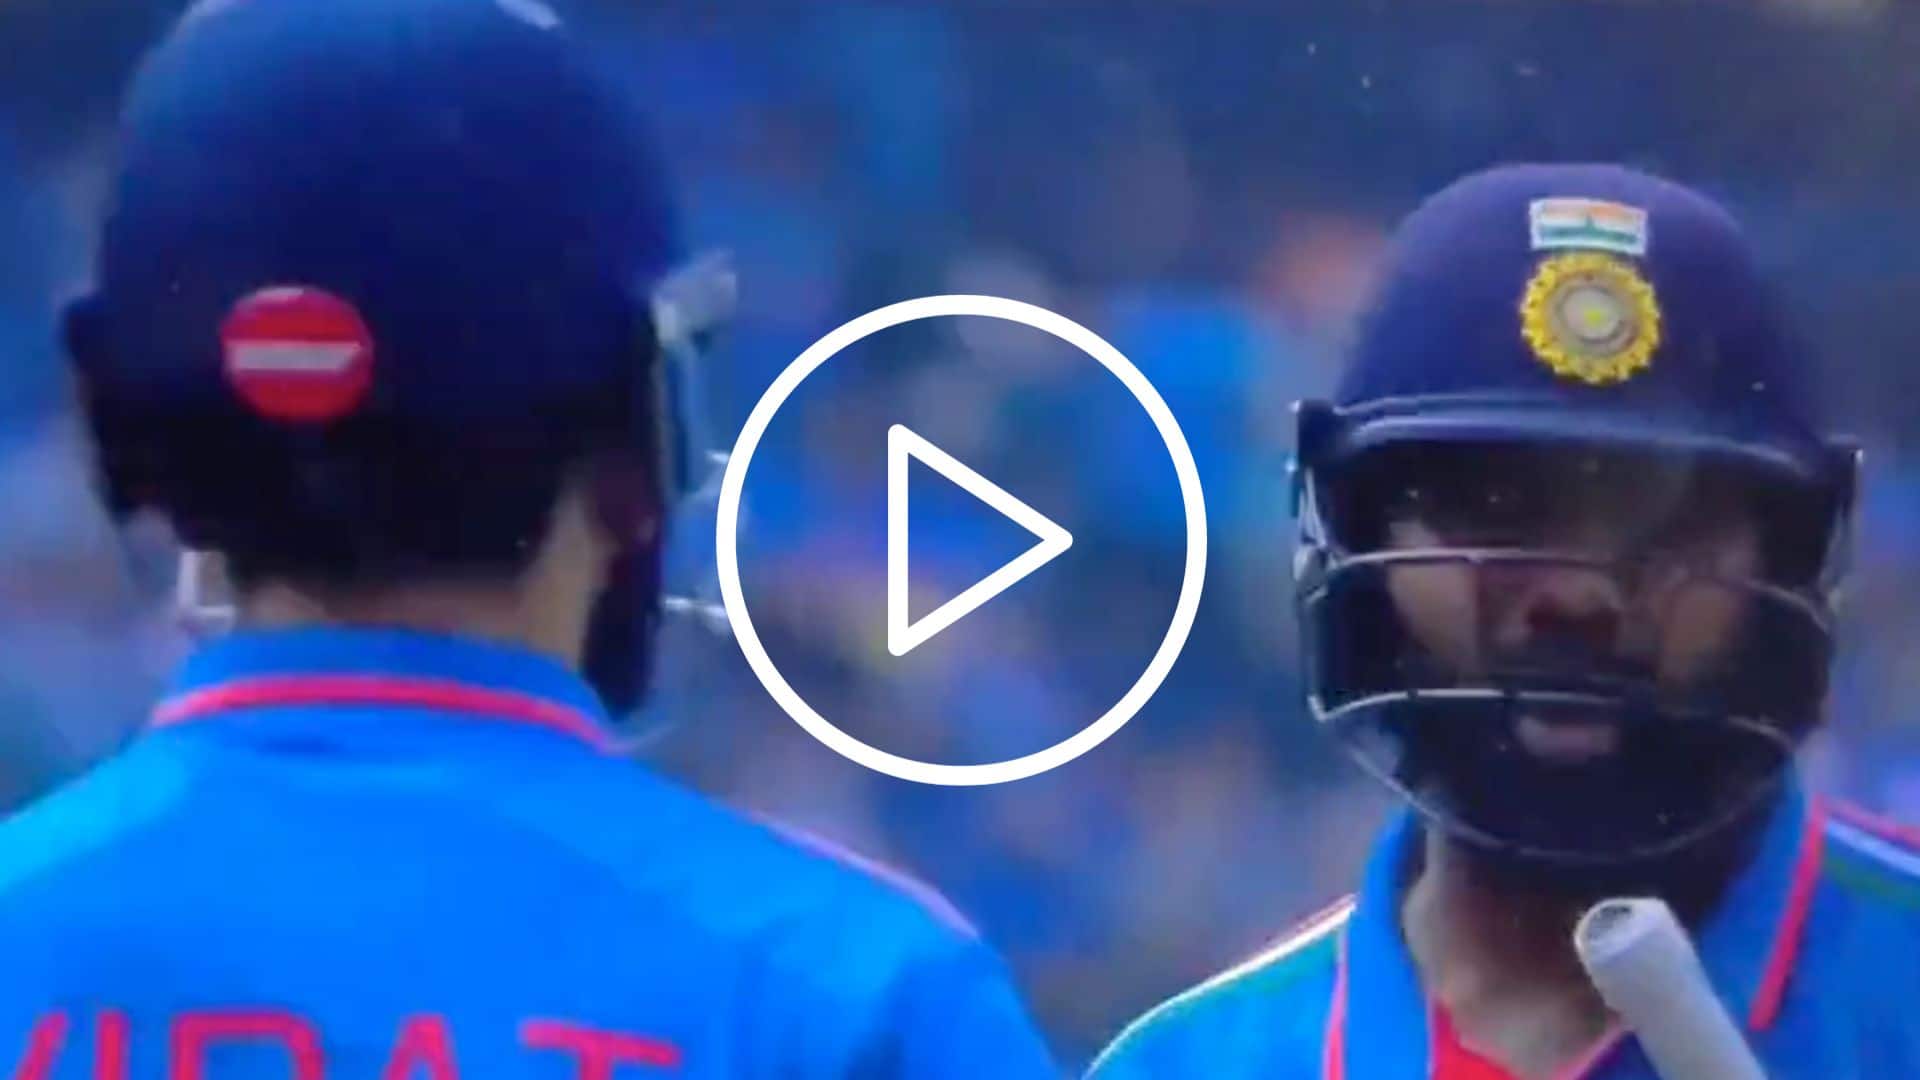 [Watch] Rohit Sharma’s ‘Full-Blooded’ Chat With Virat Kohli While Walking Back In Hut